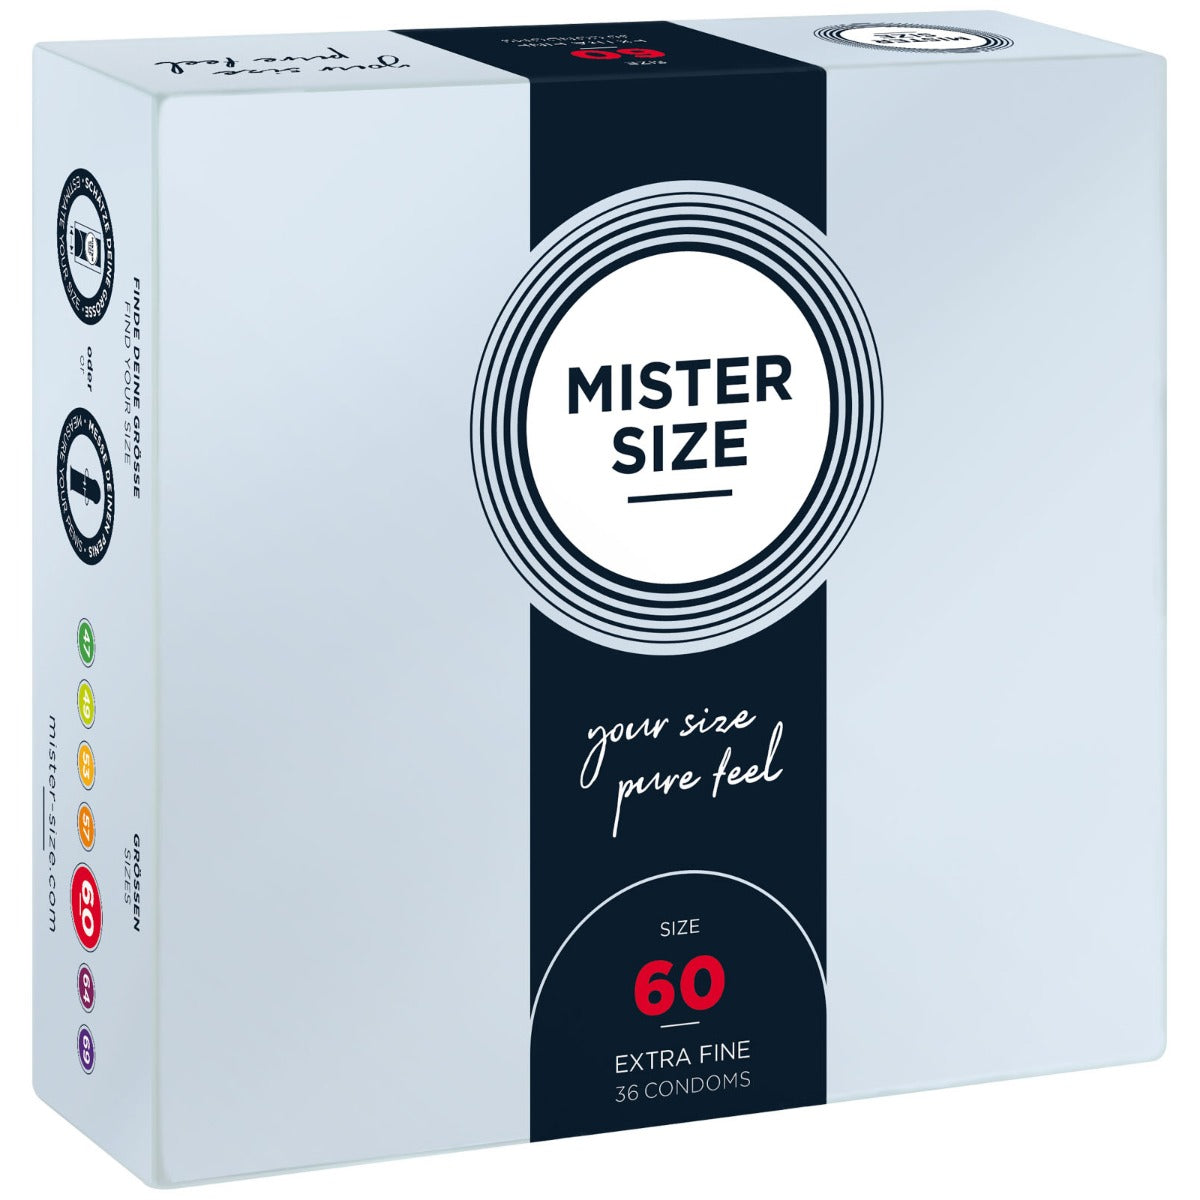 Condoms MISTER SIZE - pure feel Condoms - Size 60 mm (36 pack)   